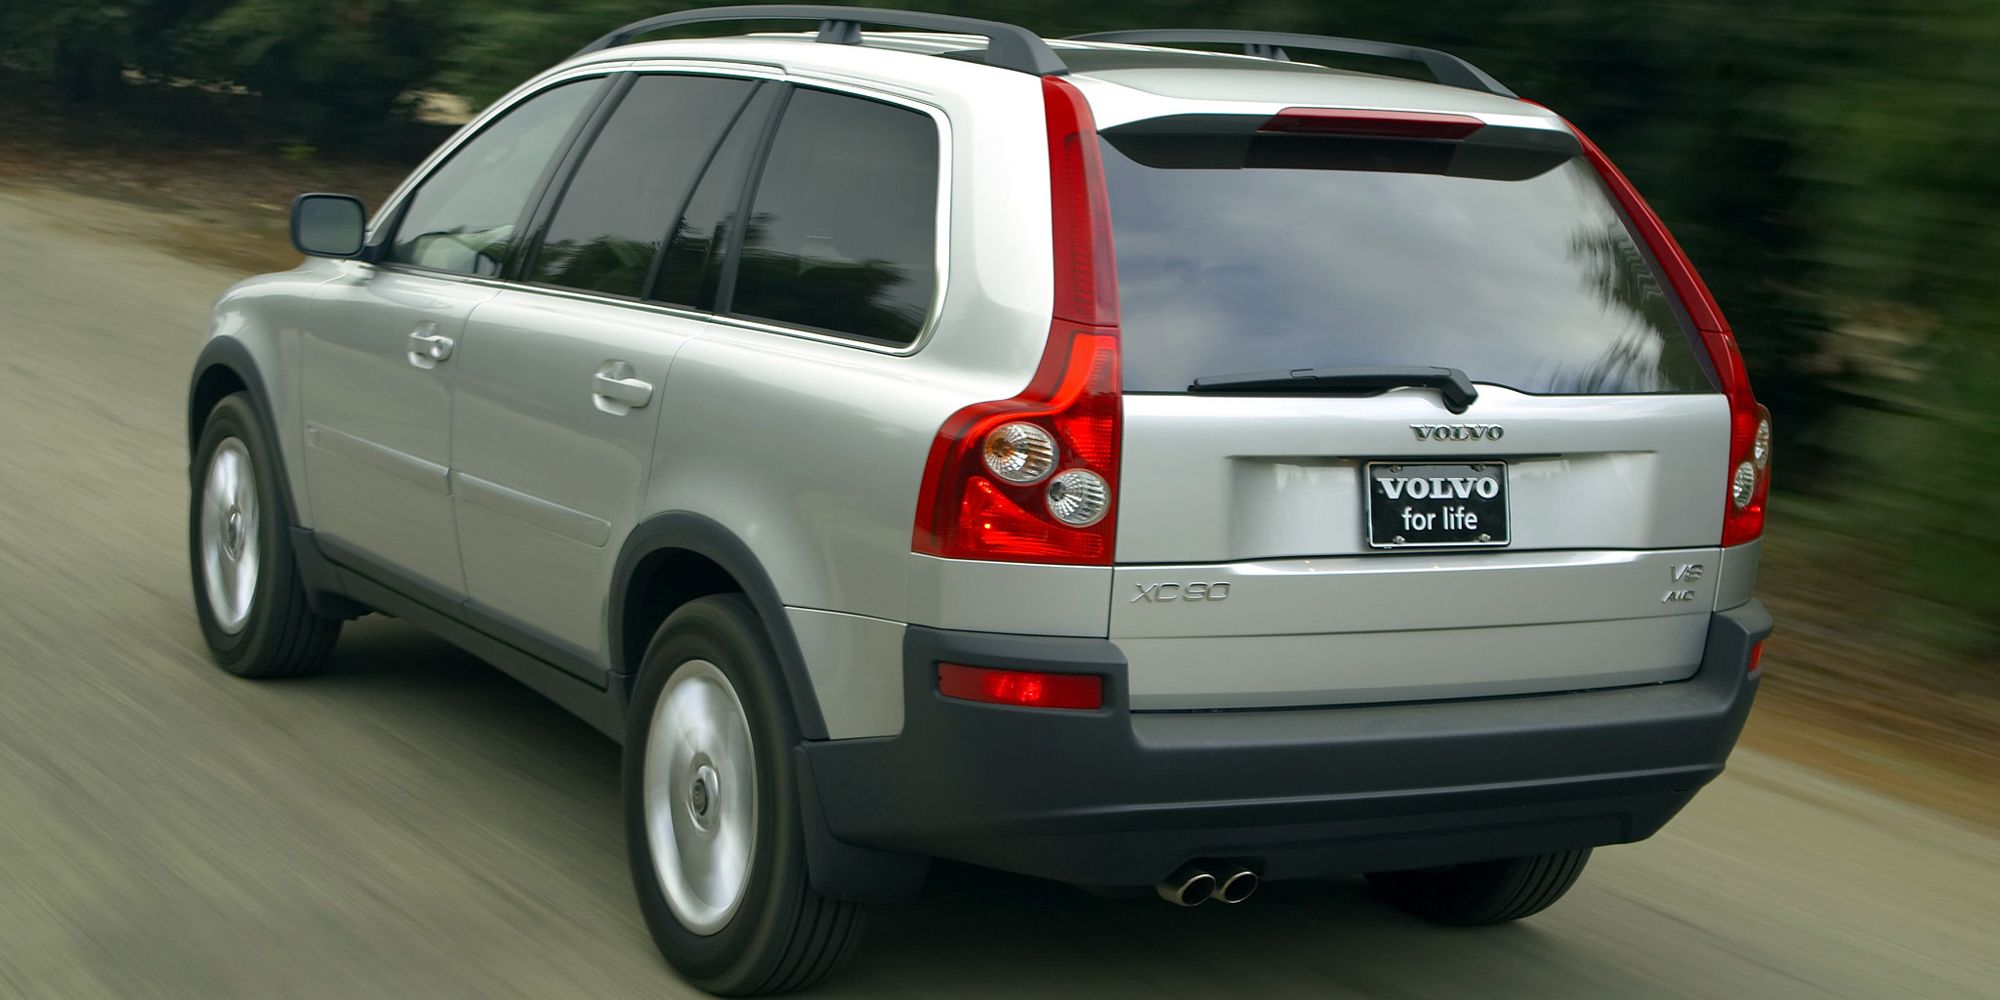 The rear of the first generation XC90